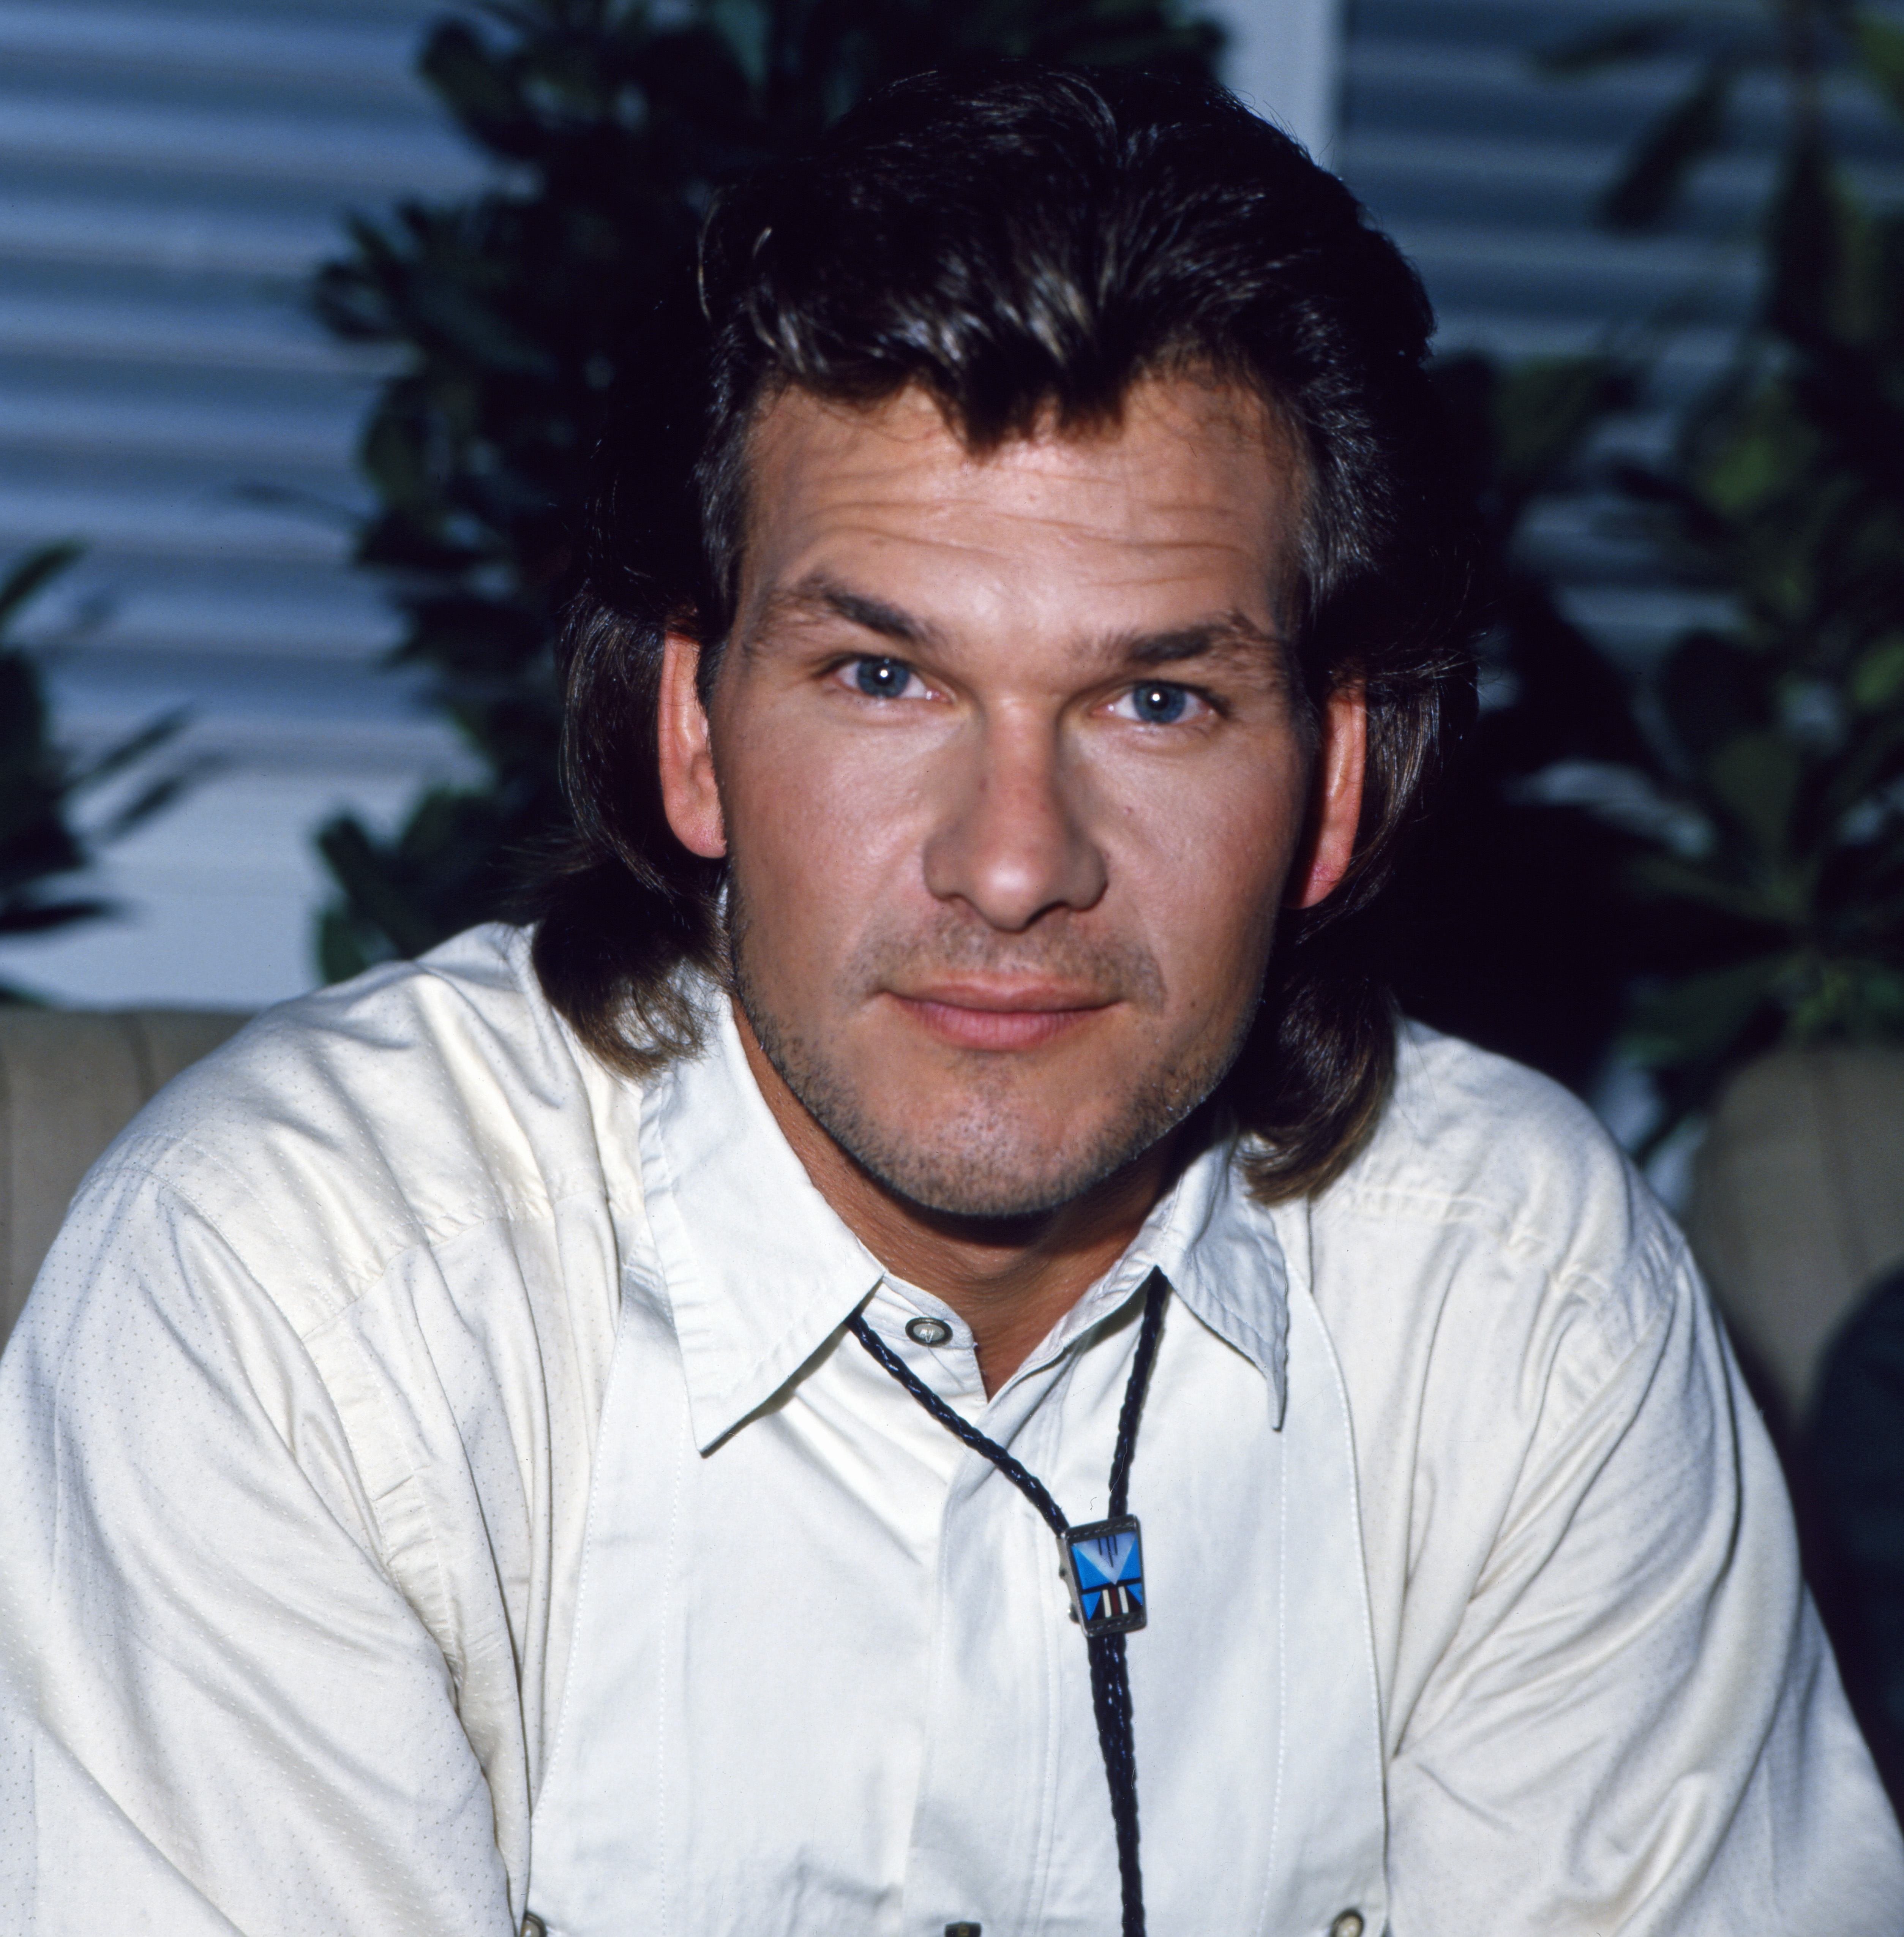 Patrick Swayze posing for a portrait in the 1980s | Source: Getty Images